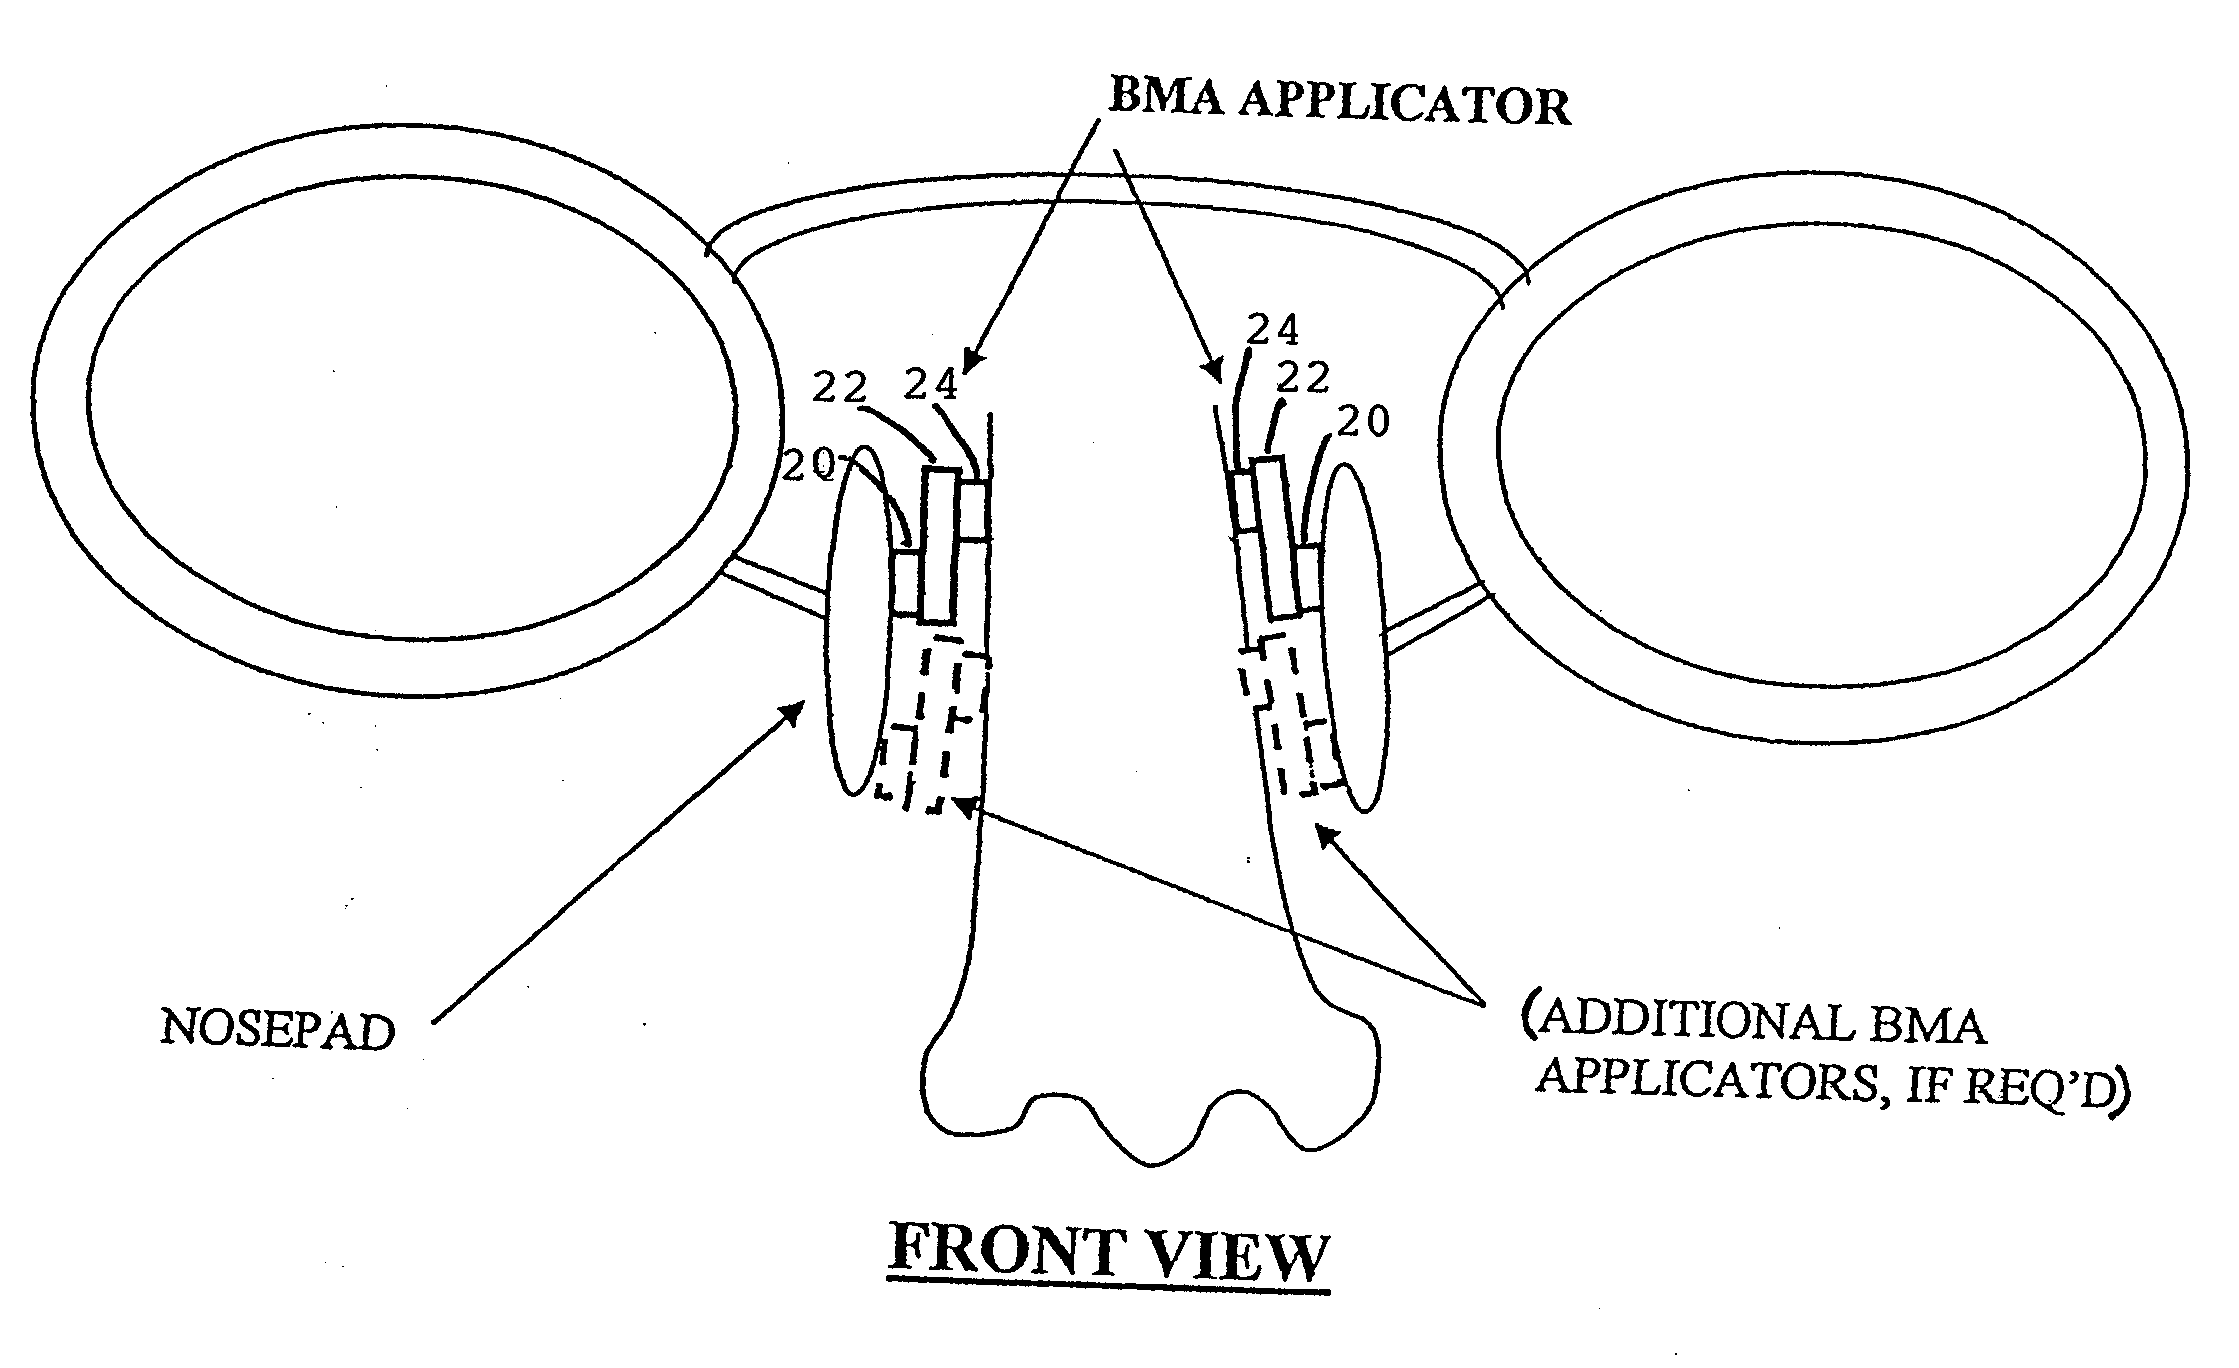 Adhesion device for applying and releasing biomimetic microstructure adhesive from a contact surface